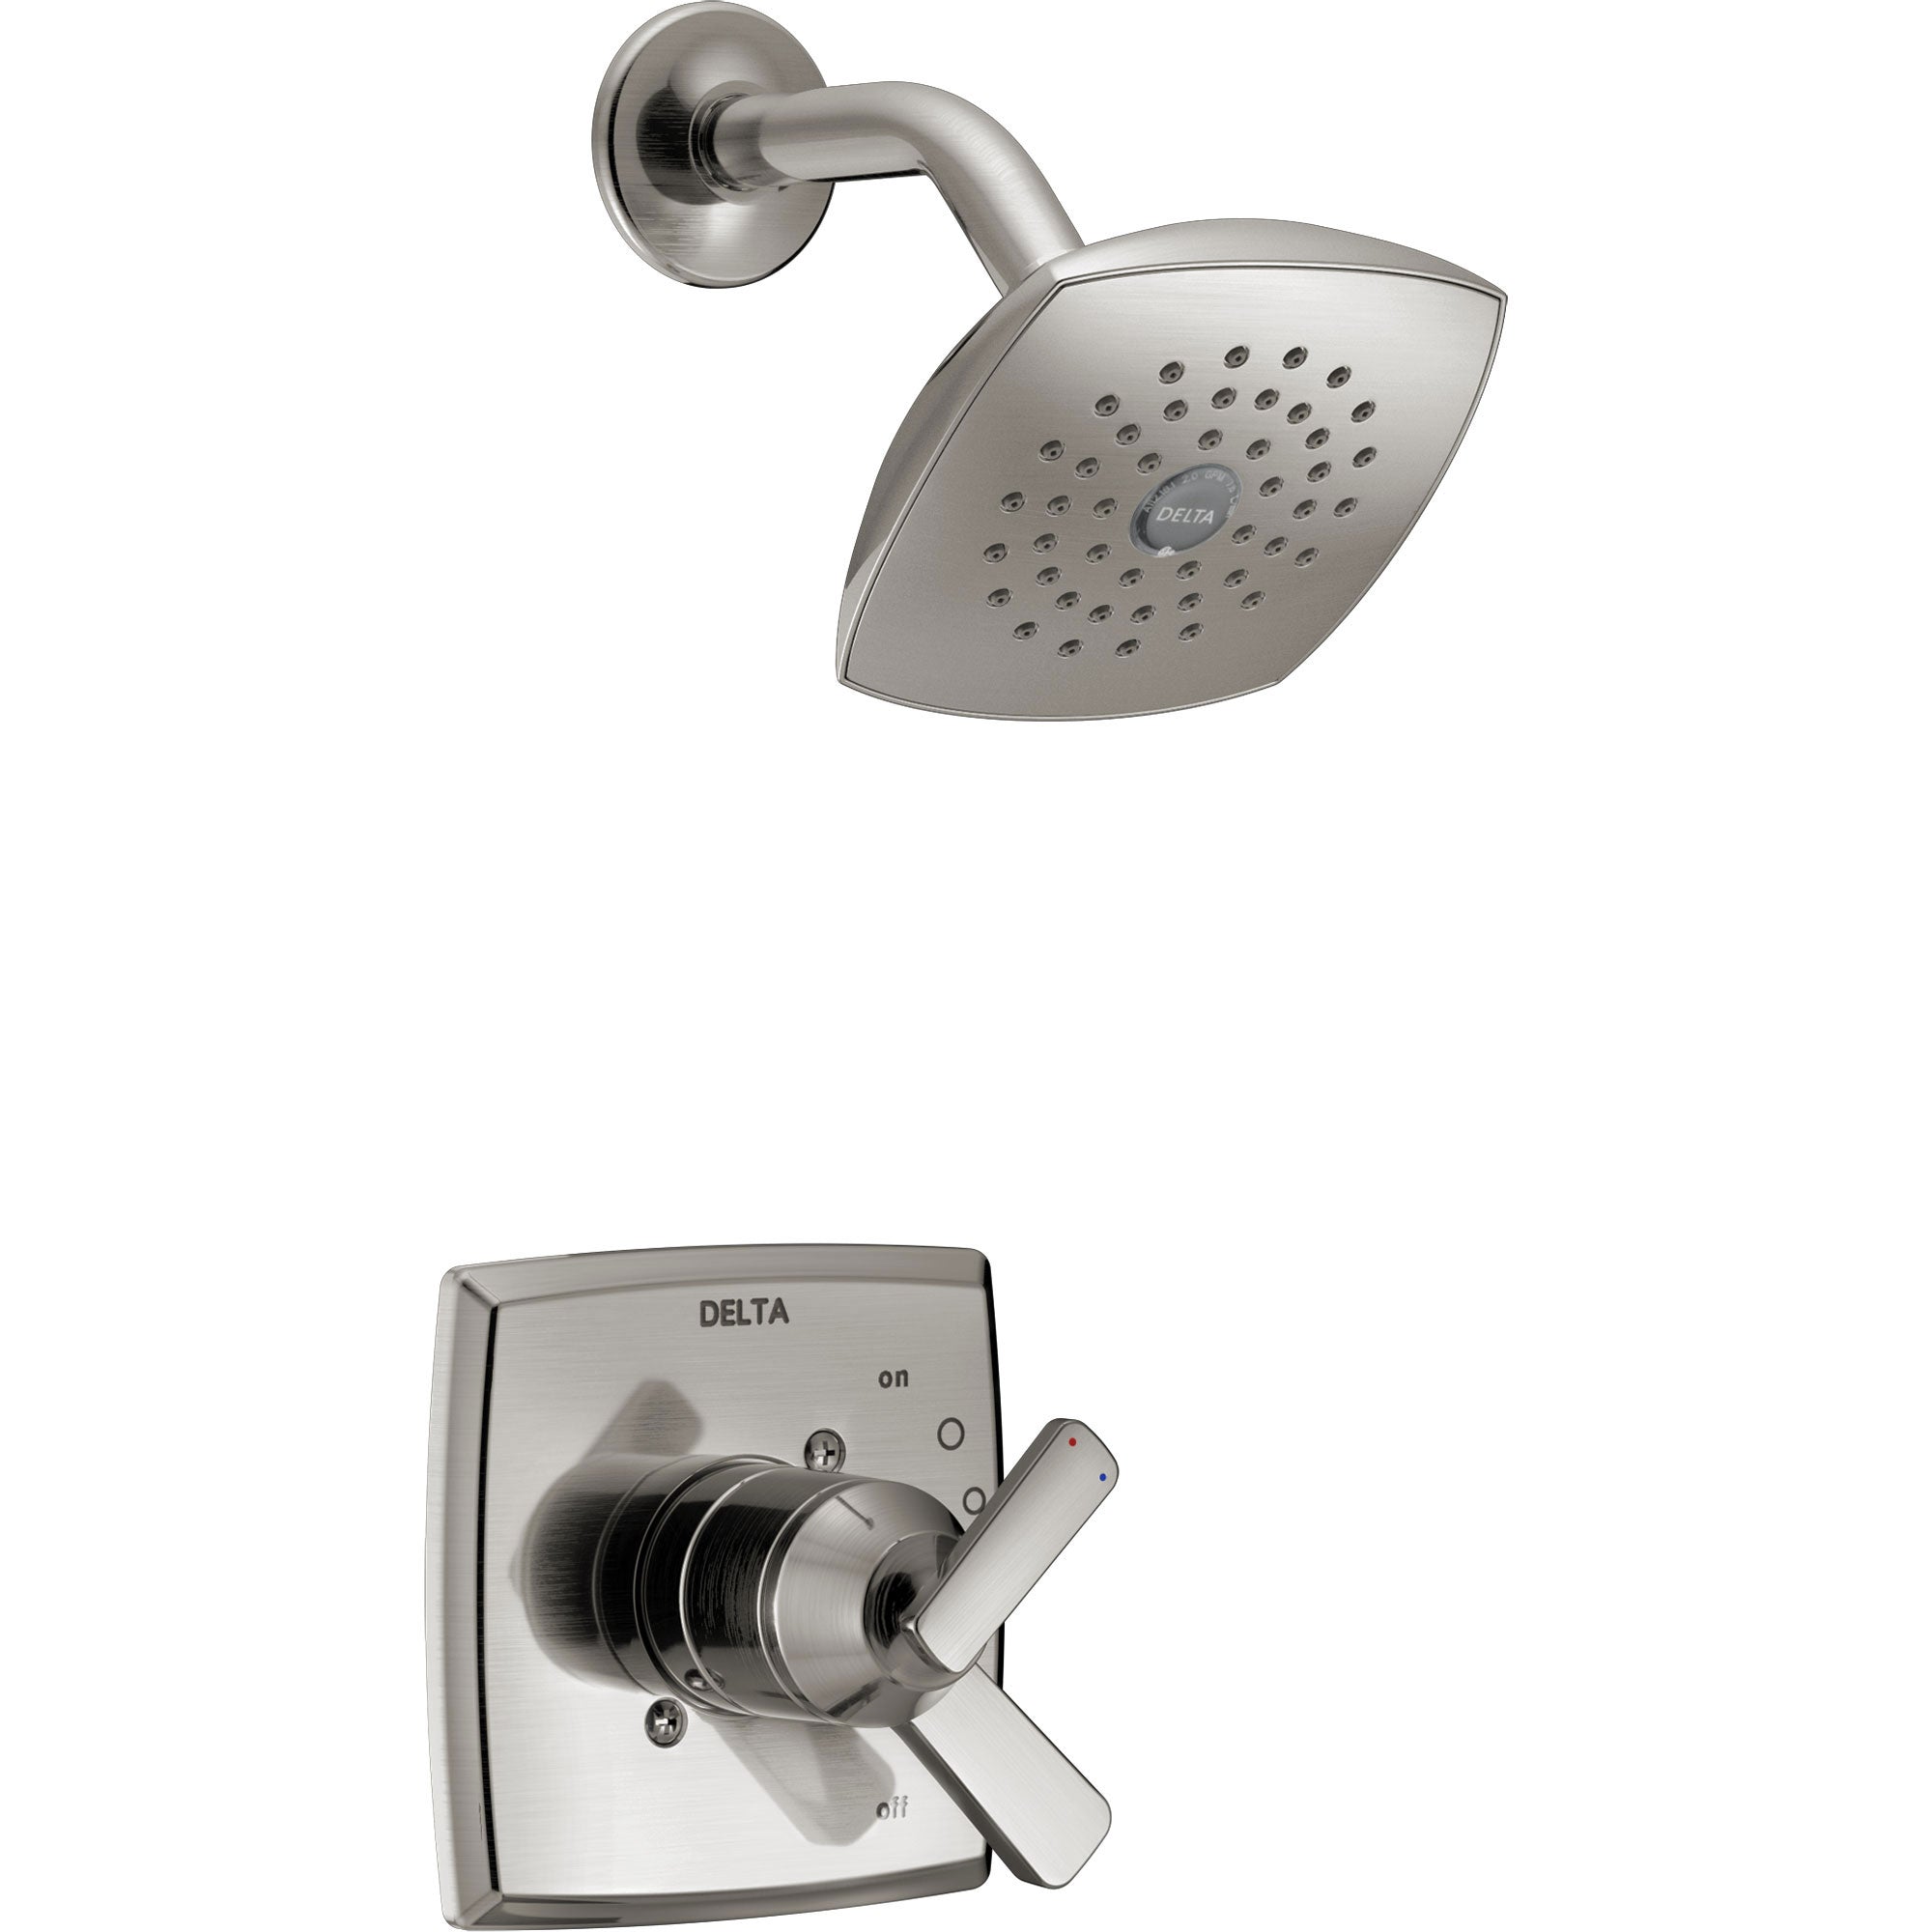 Delta Ashlyn Stainless Steel Finish Monitor 17 Series Shower Only Faucet with Dual Temperature and Pressure Control INCLUDES Rough-in Valve with Stops D1135V